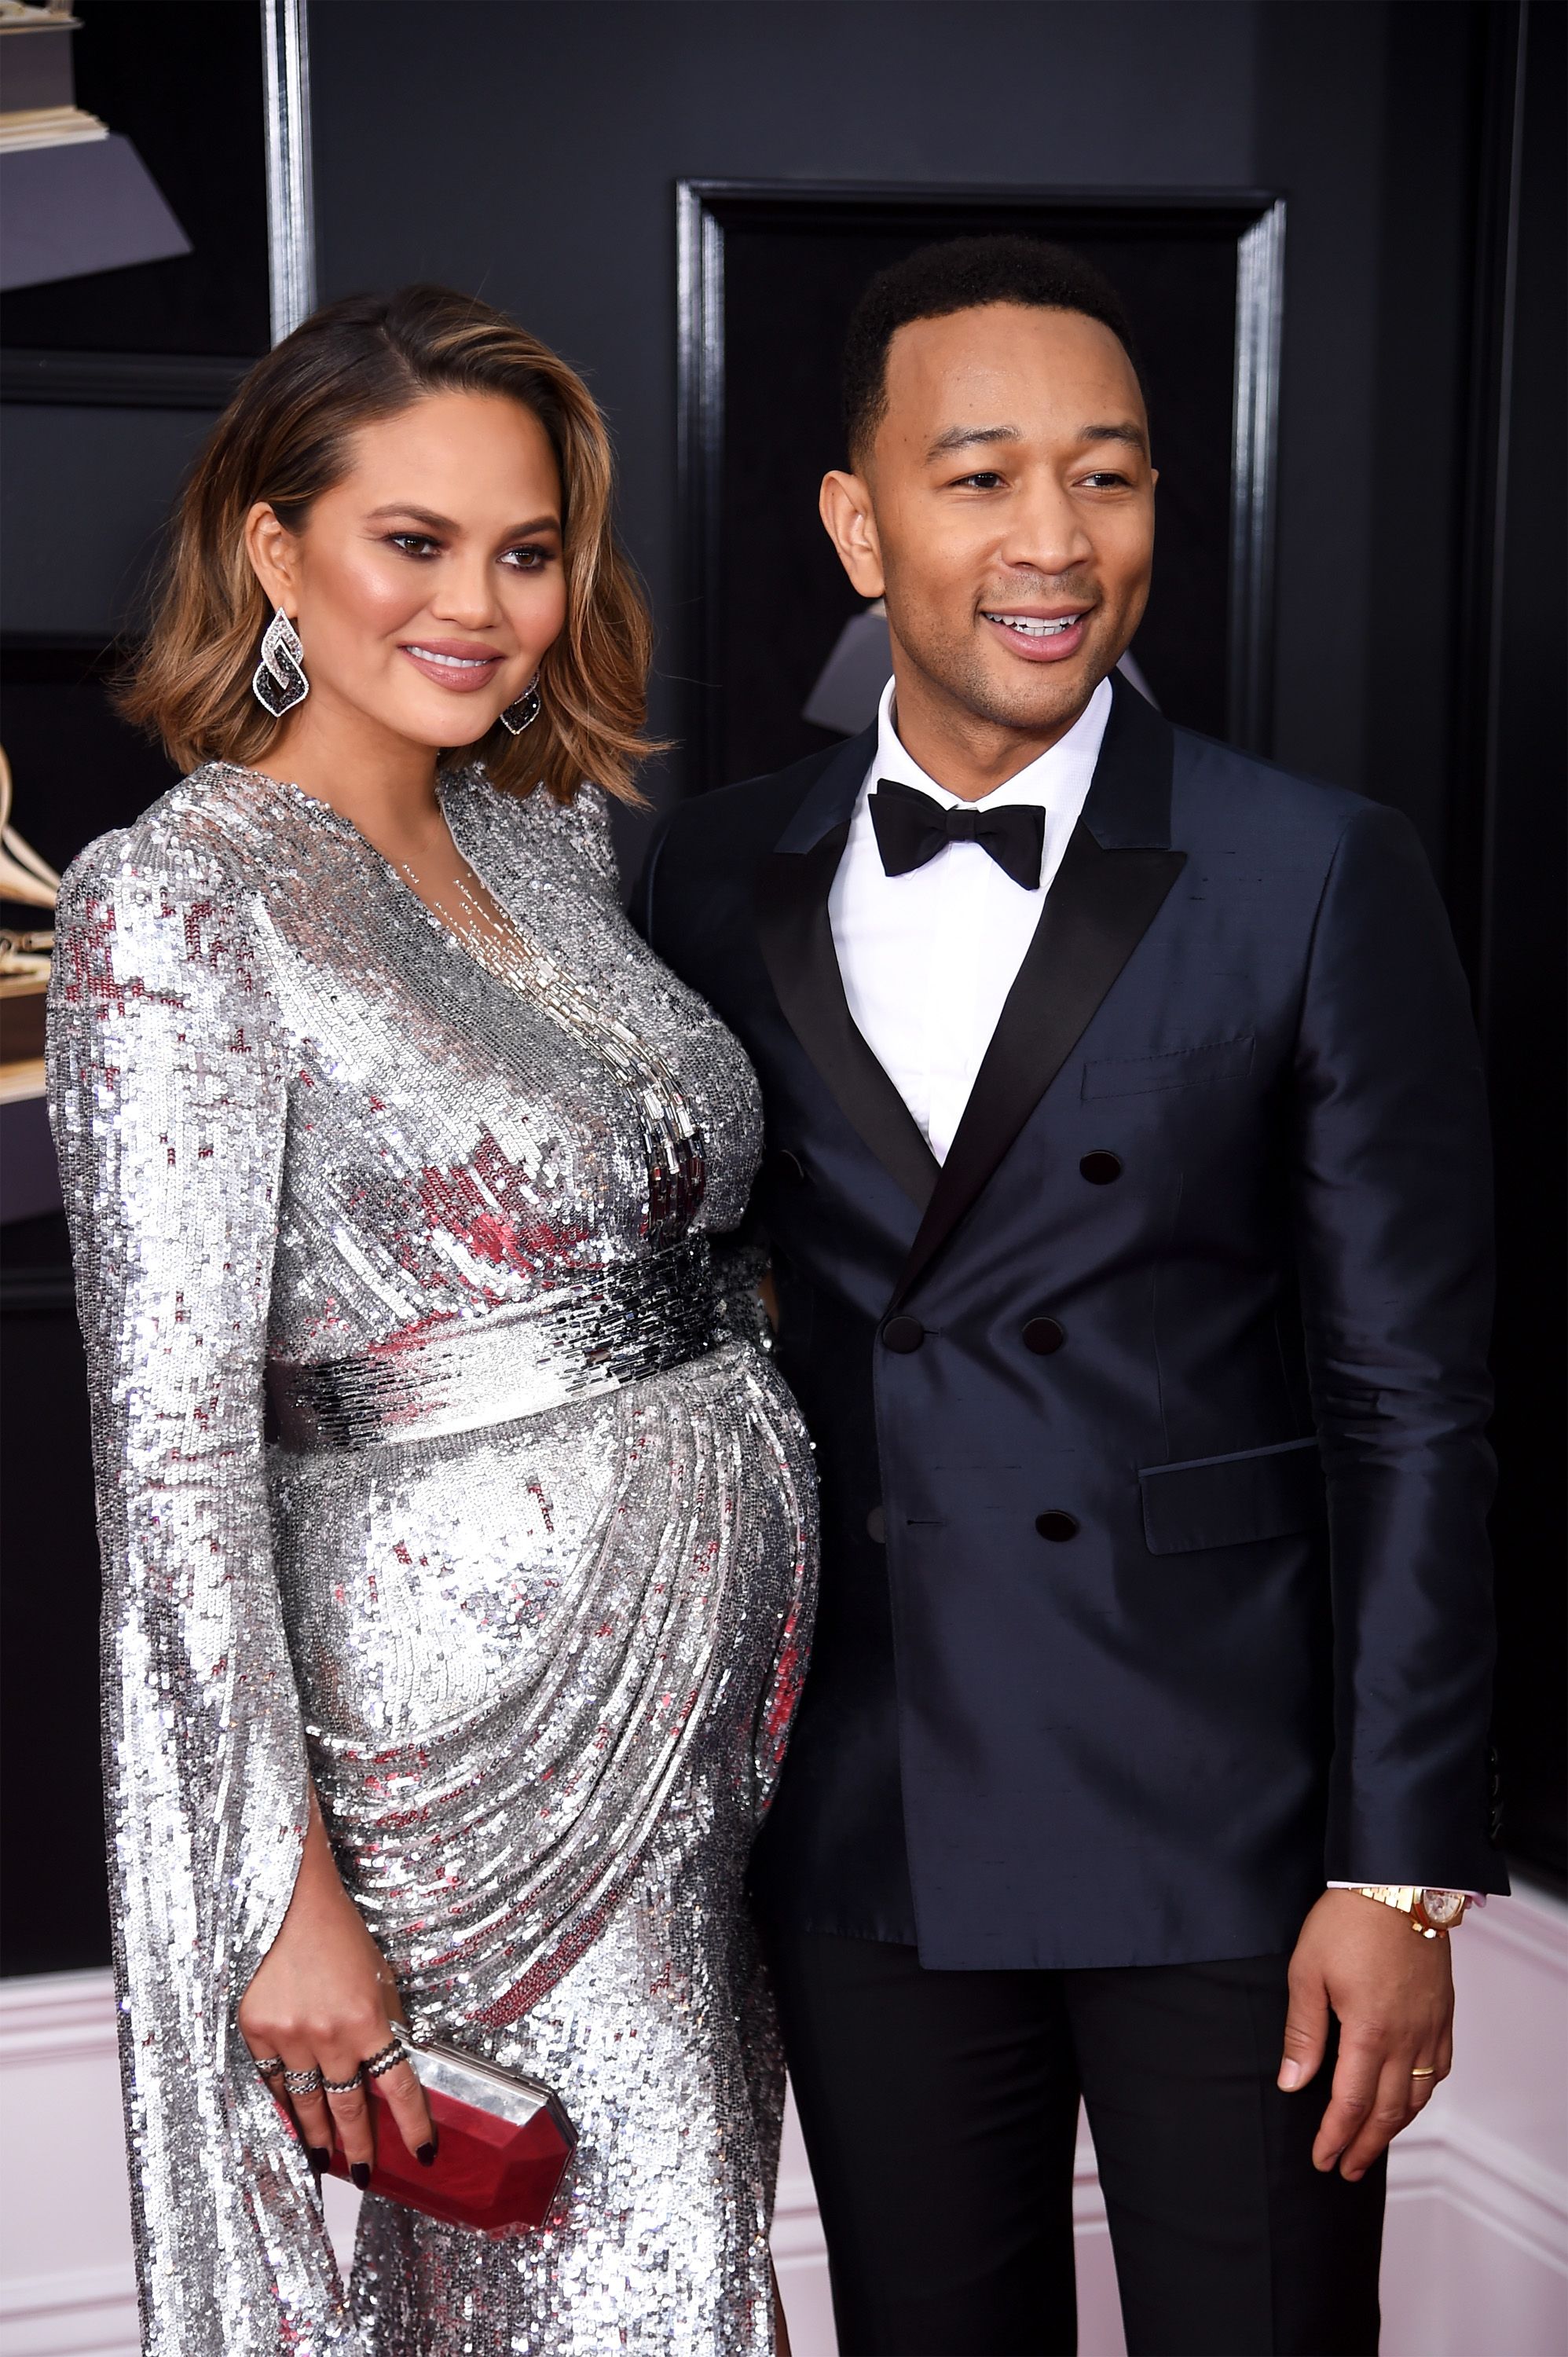 Chrissy Teigen and John Legend at the Grammy Awards on January 28, 2018 in New York | Photo: Getty Images